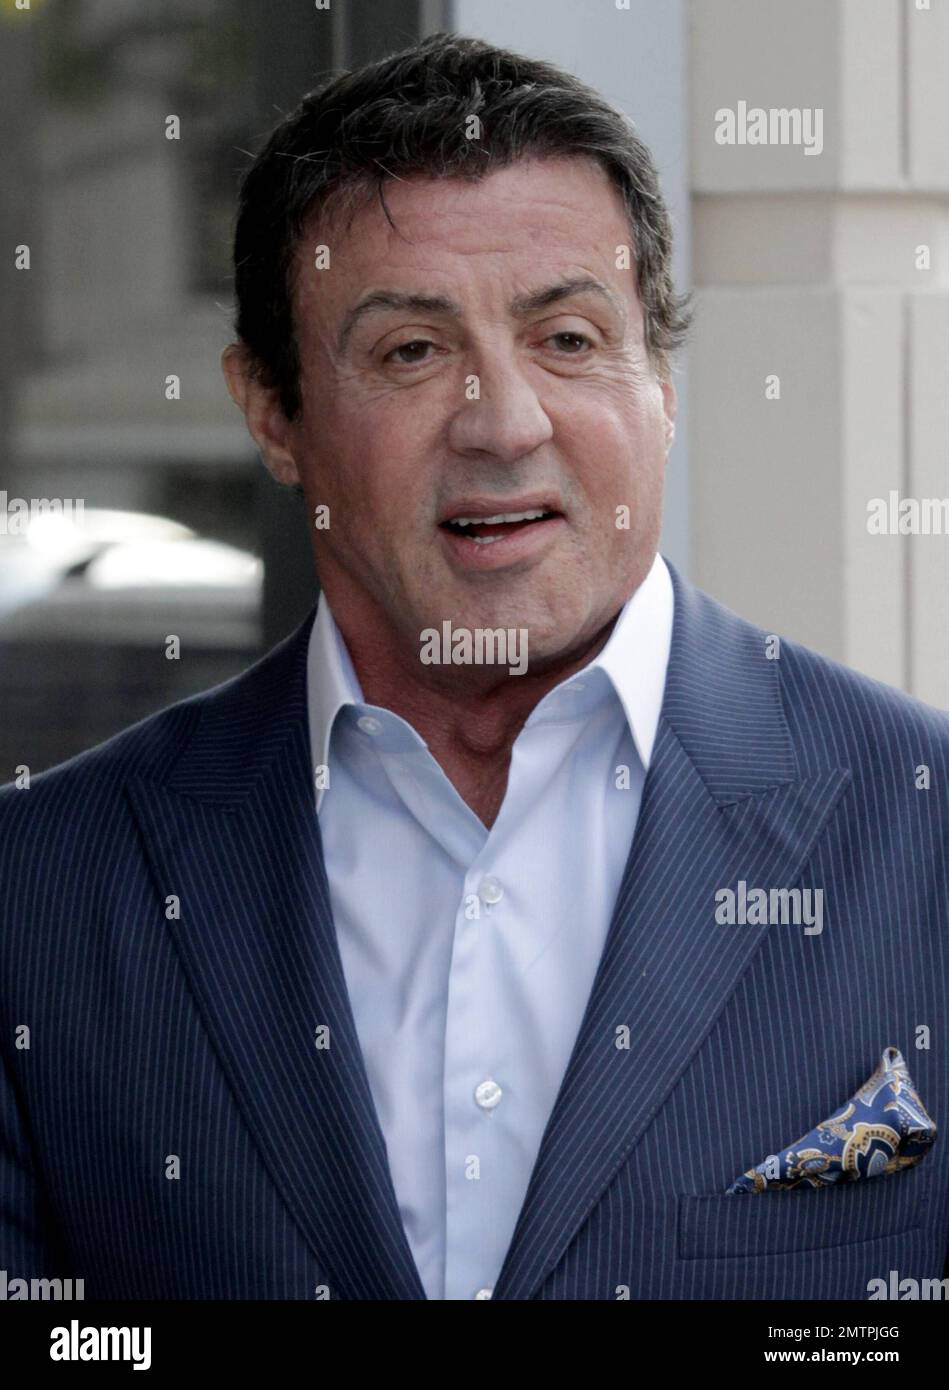 Actor Sylvester Stallone was seen in blue suit out in Beverly Hills. It's been reported that Stallone will be returning with Rocky Balboa but this time as a musical. Stallone will be co-producing 'Rocky:The Musical' based on the 1976 movie that launched his career. Inspired by the success of 'Spider-Man:Turn Off the Dark,' Stallone and company are reframing the underdog boxing tale as a love story between Rocky and Adrian. 65 year old Sylvester won't be putting on the gloves this time, he'll be active behind the scenes with producer Kevin King Templeton from Stallone's Rogue Marble production Stock Photo